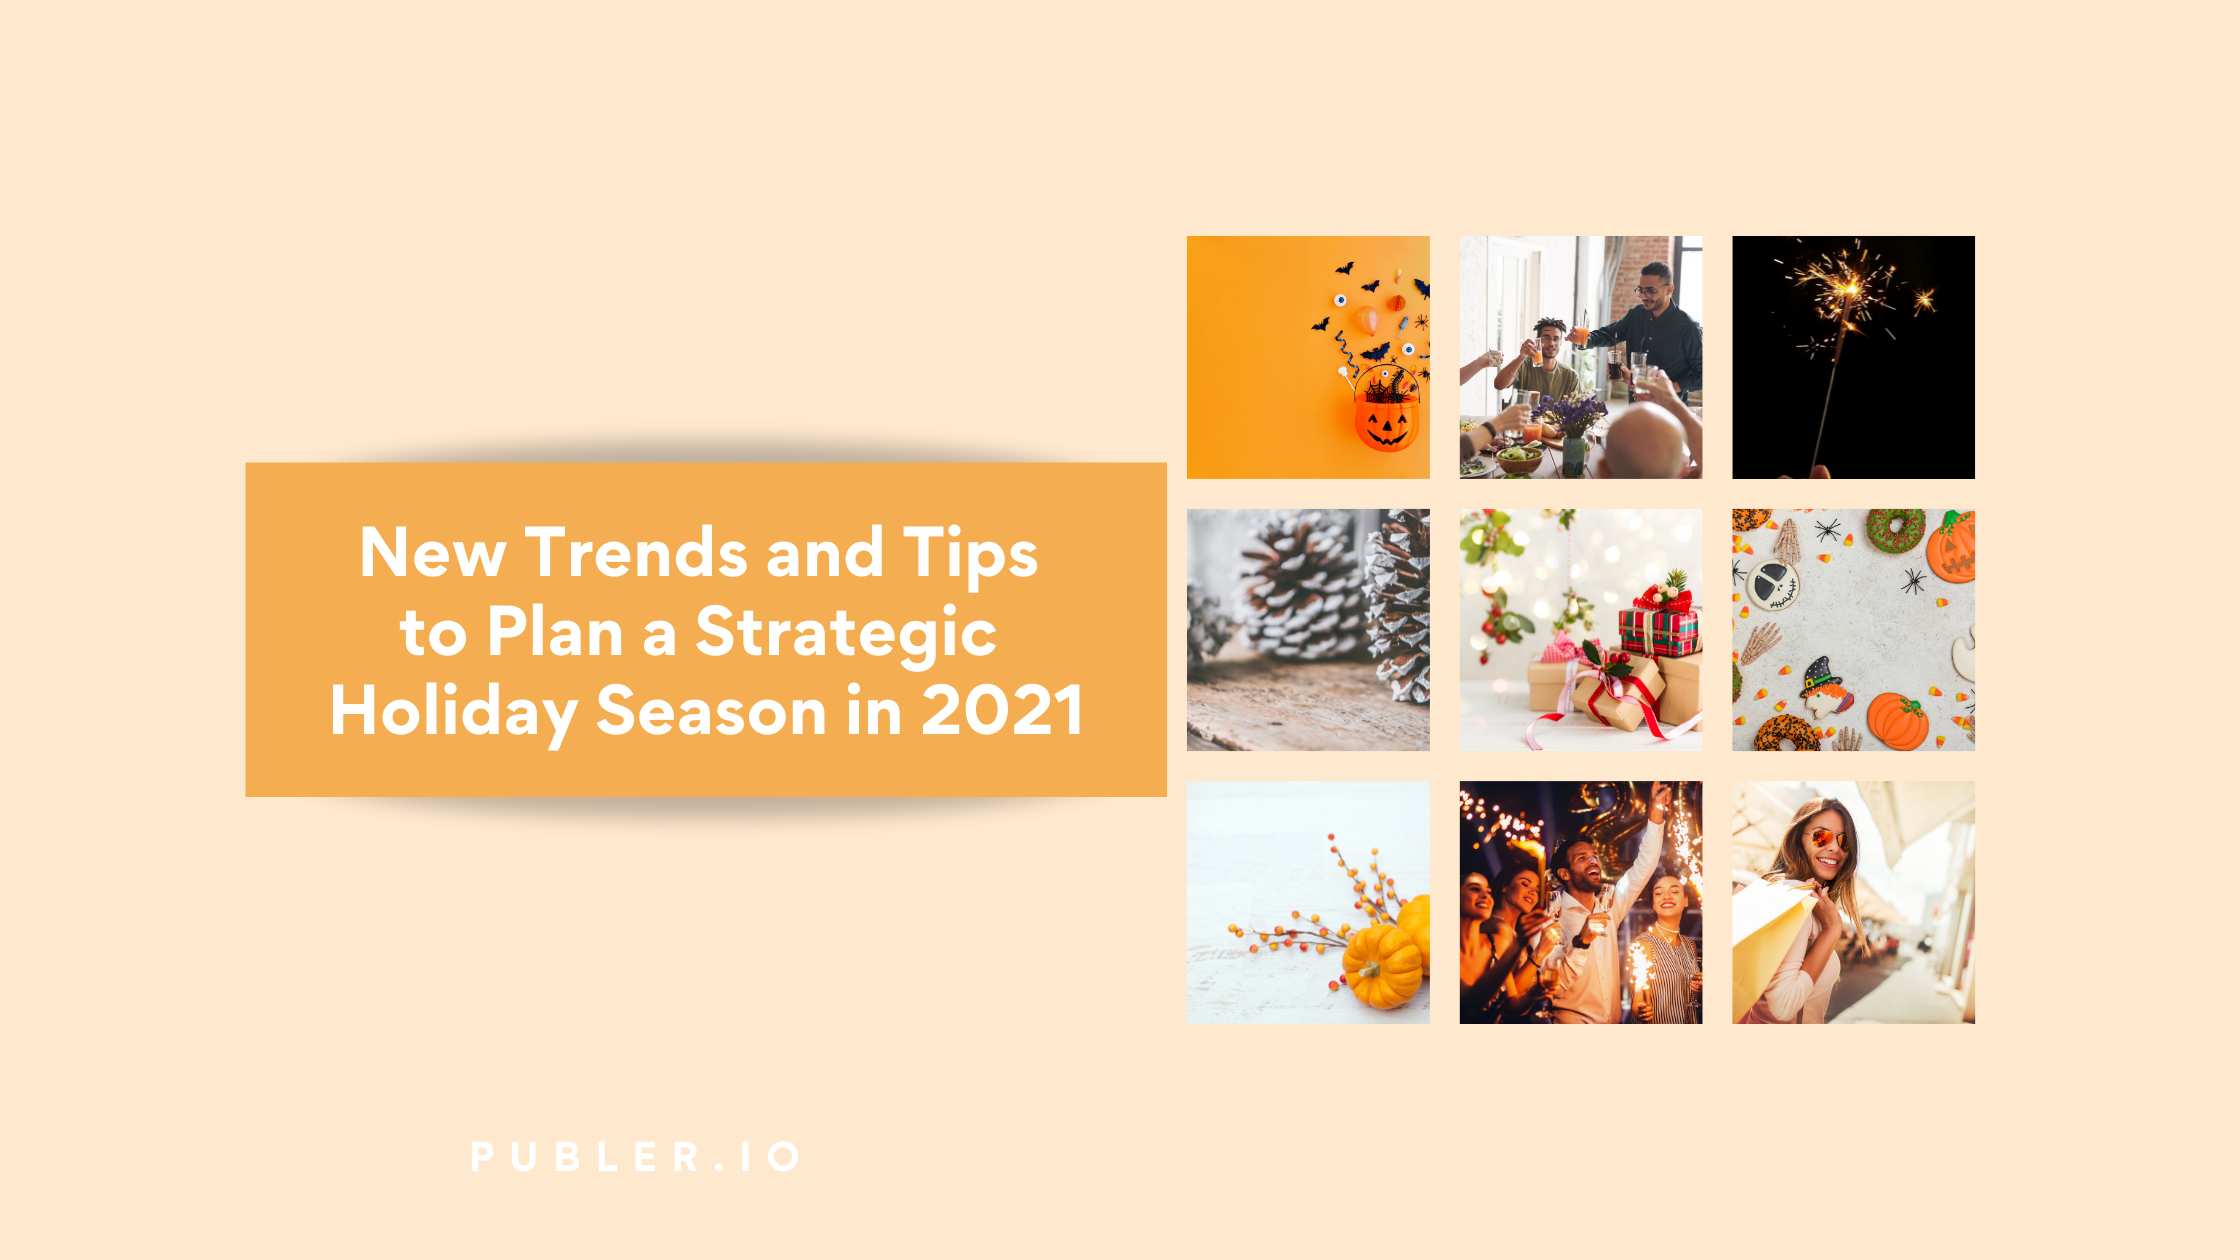 Download the full festive holiday guides from major social networks in a click. Become part of trends and earn an online reputation easily. New Trends and Tips to Plan a Strategic Holiday Season in 2021 by Publer.io